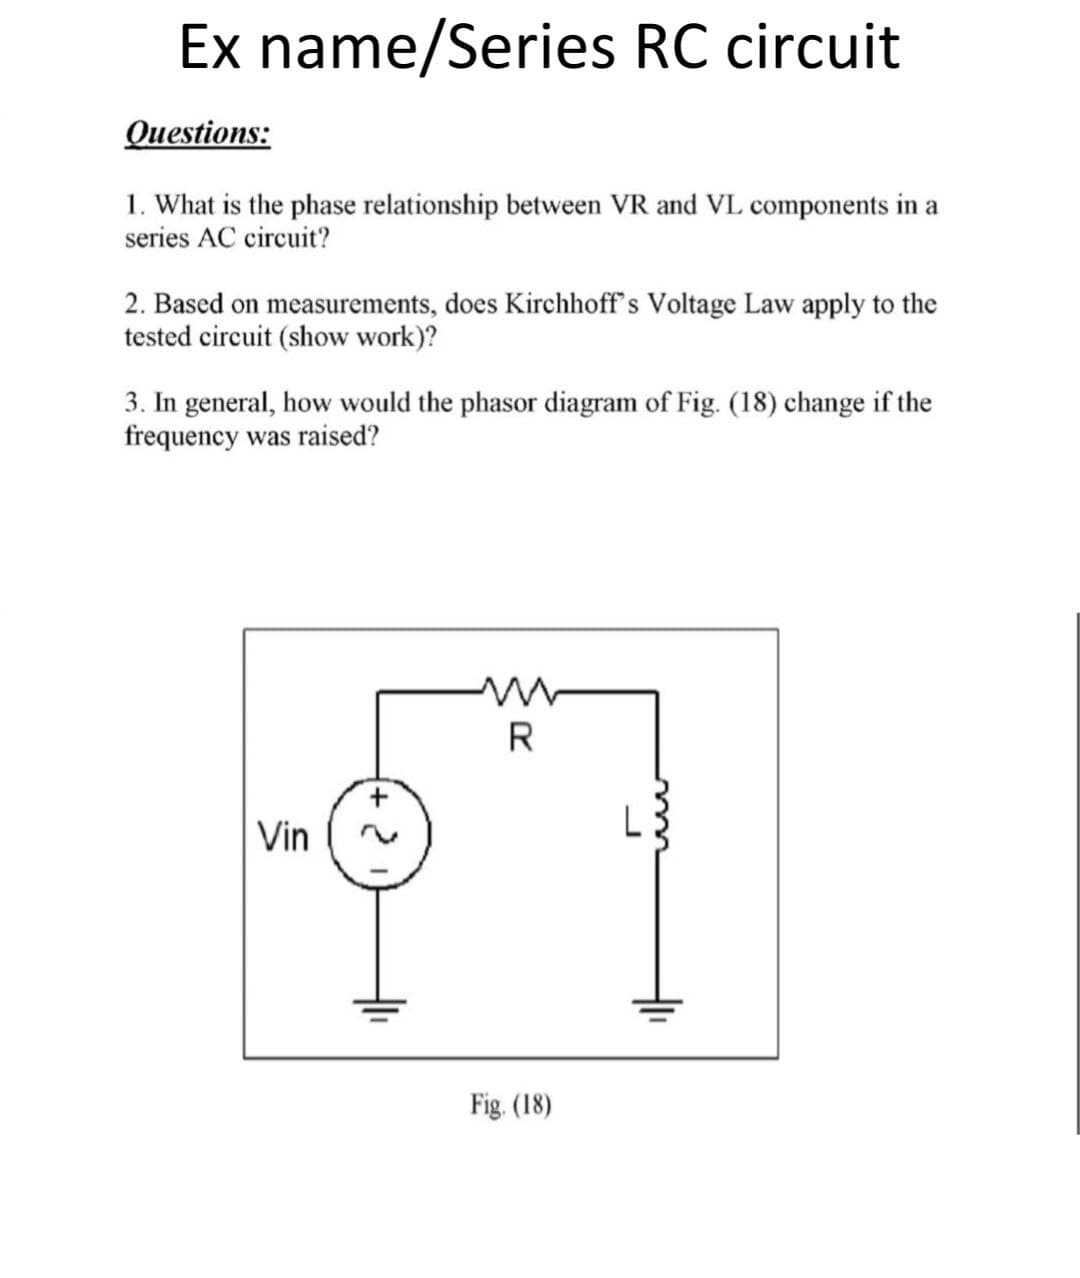 Ex name/Series RC circuit
Questions:
1. What is the phase relationship between VR and VL components in a
series AC circuit?
2. Based on measurements, does Kirchhoff's Voltage Law apply to the
tested circuit (show work)?
3. In general, how would the phasor diagram of Fig. (18) change if the
frequency was raised?
R
Vin
L
Fig. (18)
두
